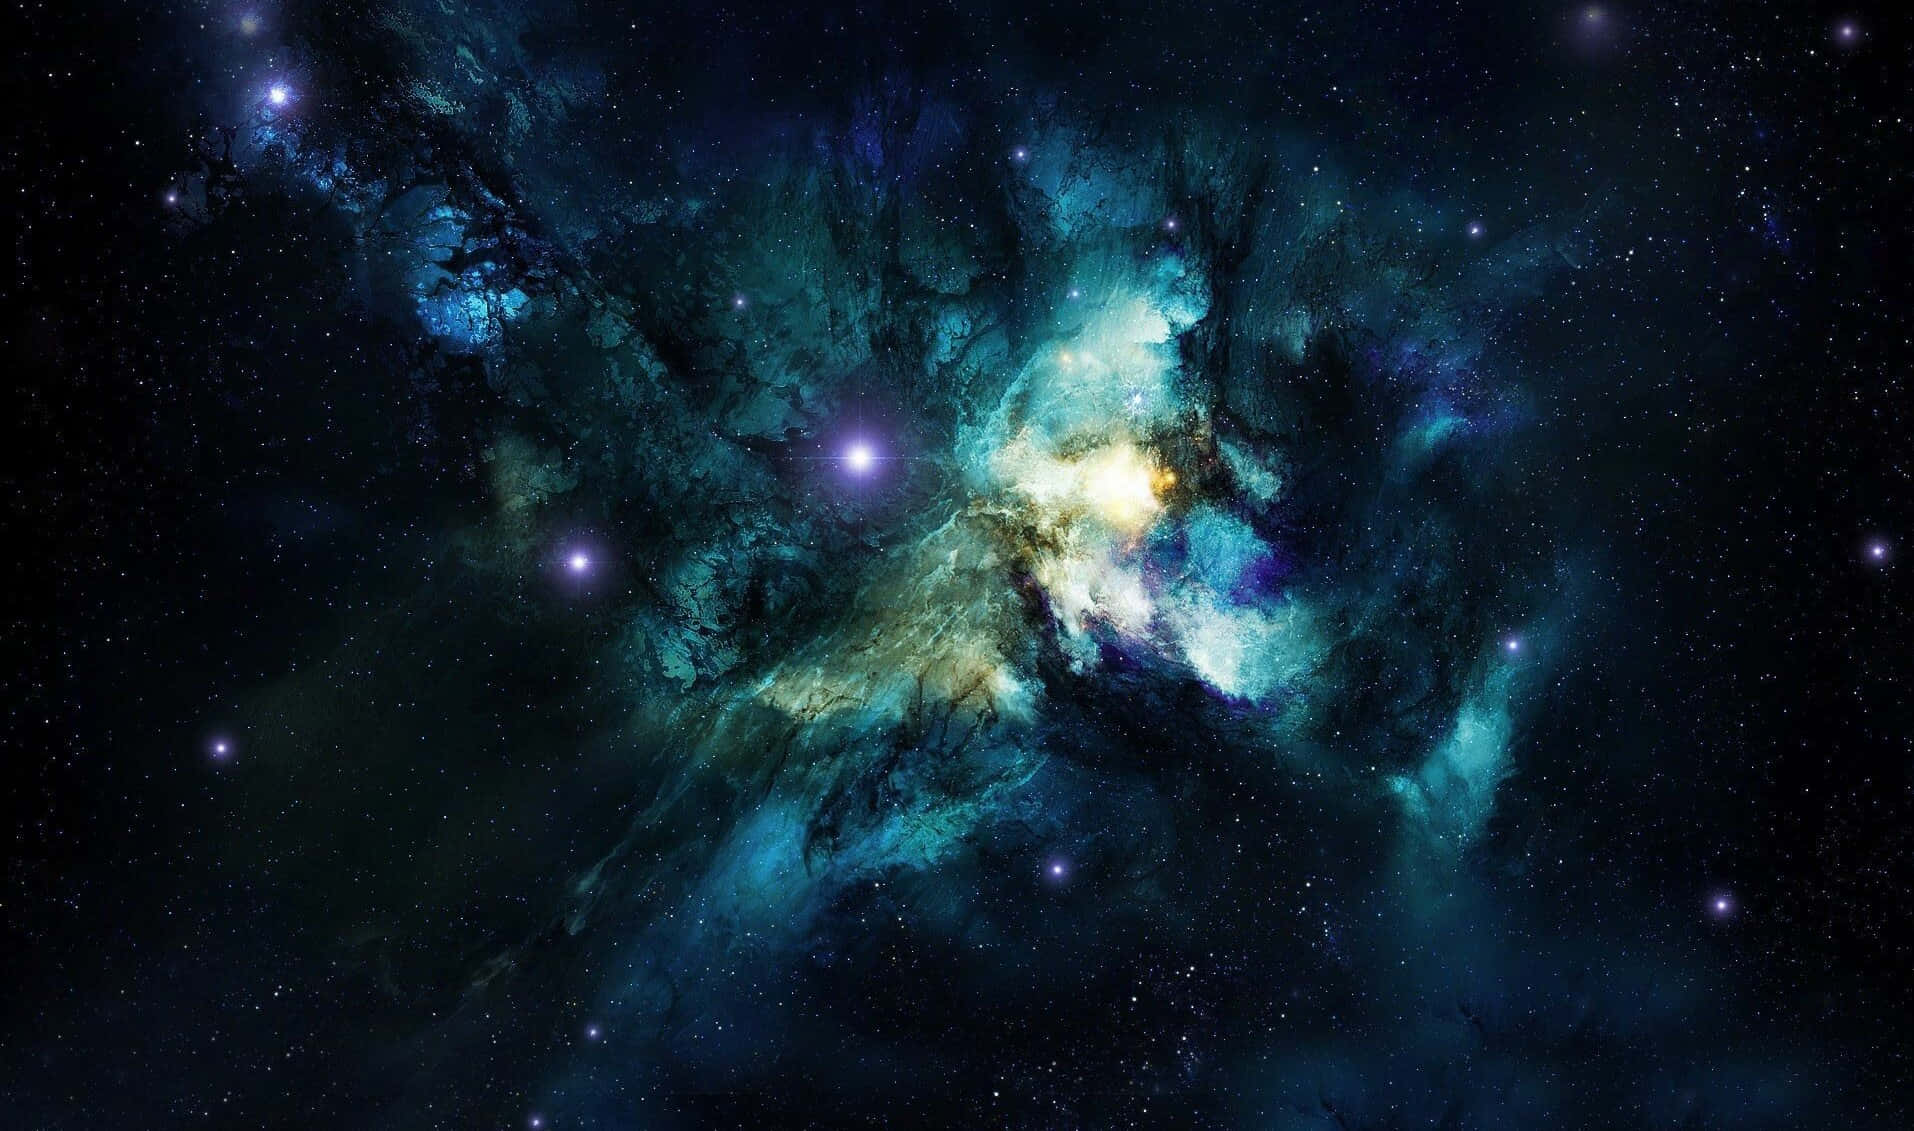 Take a trip to the edge of the universe with the beautiful Nebula